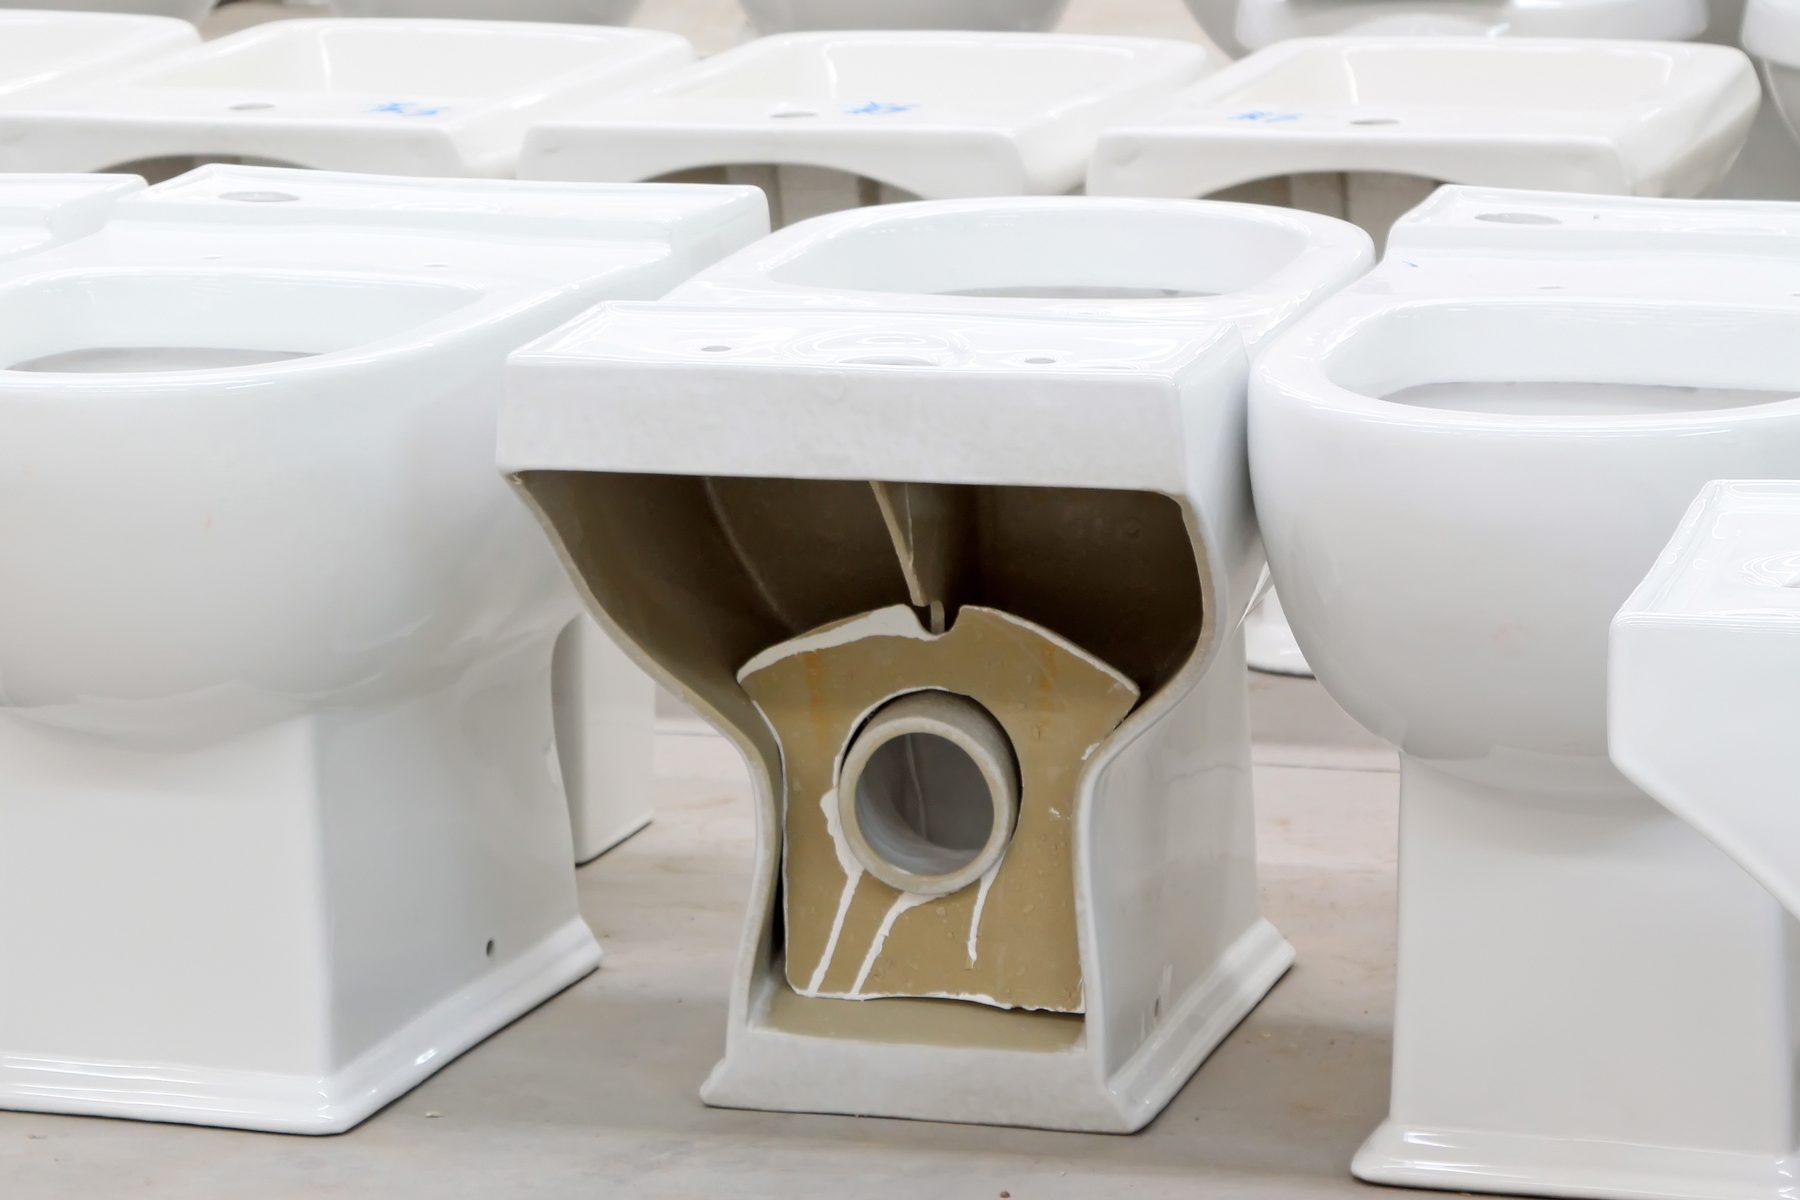 What Are Toilets Made Out Of?